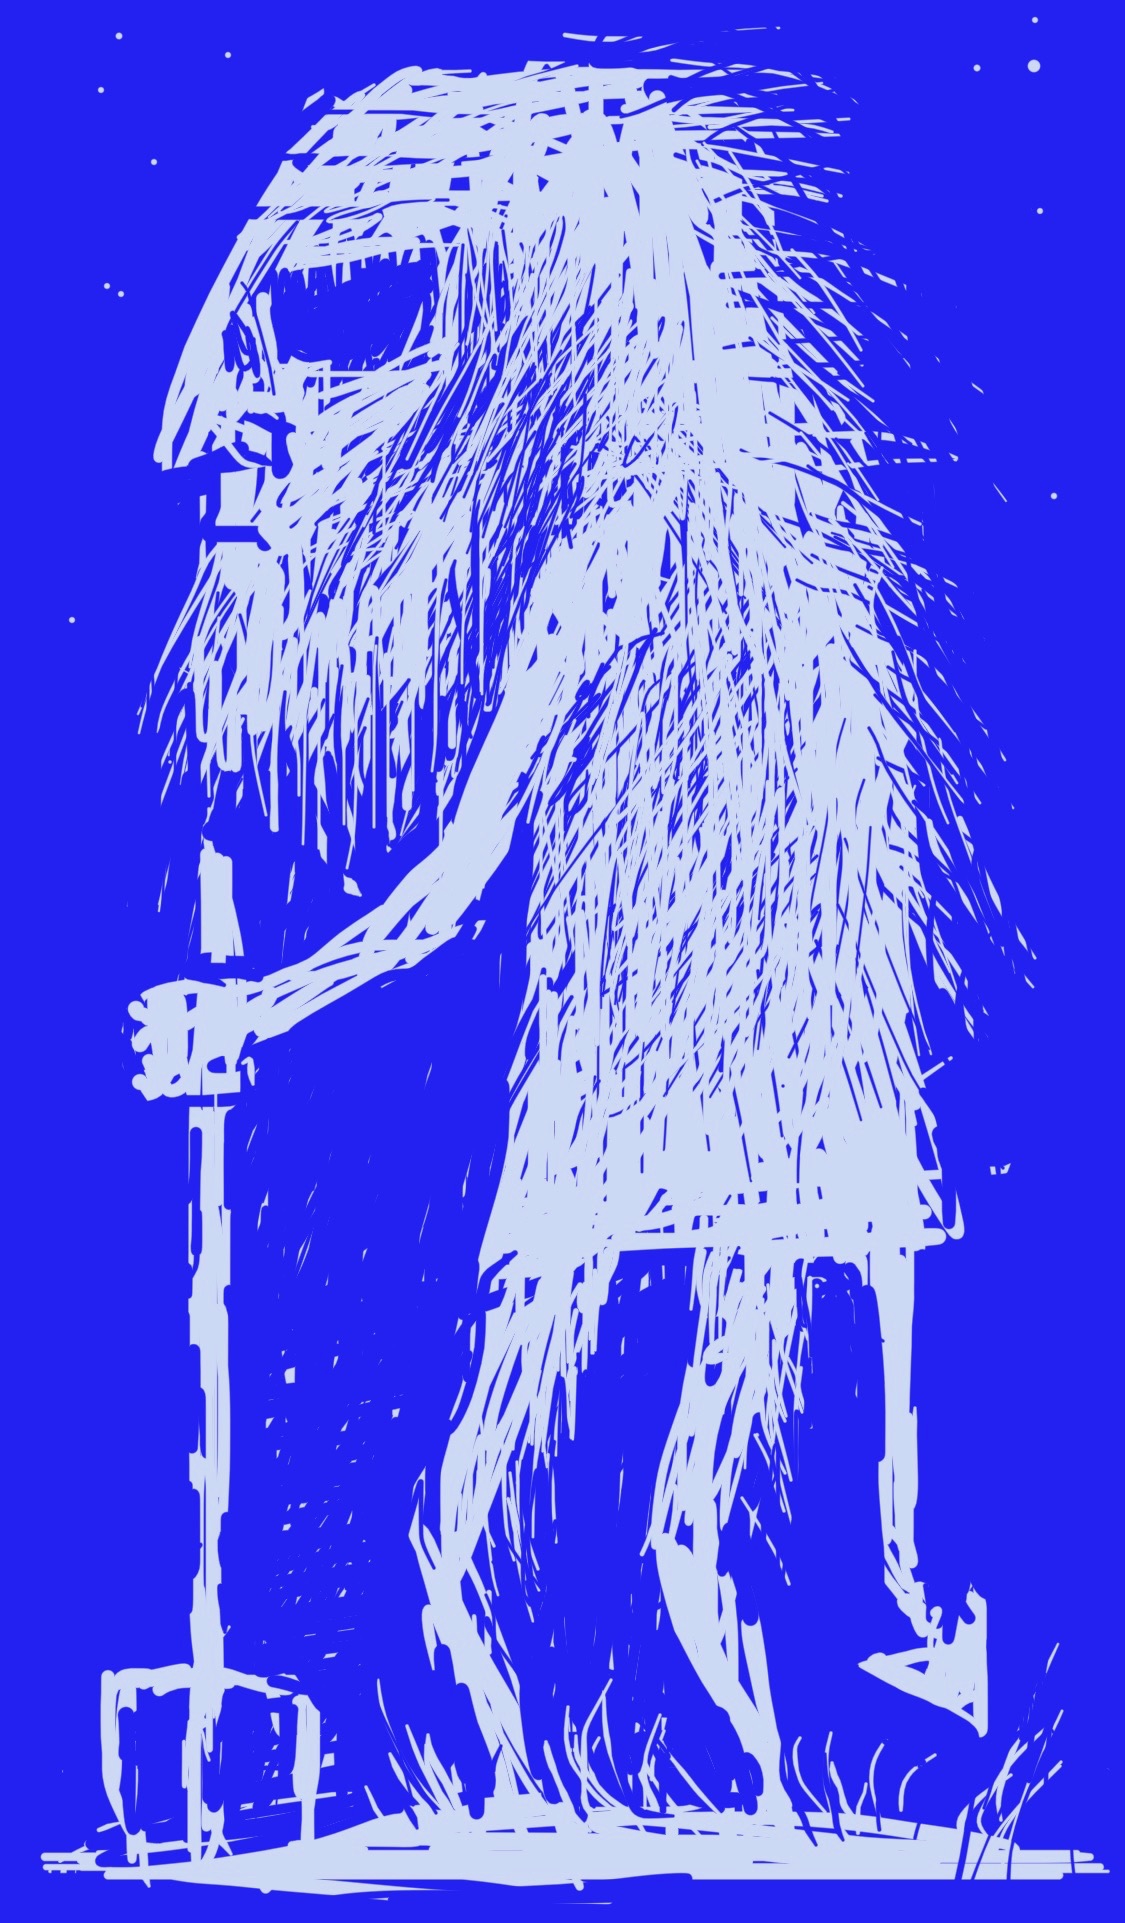 A hairy figure with a trident and pointed tail